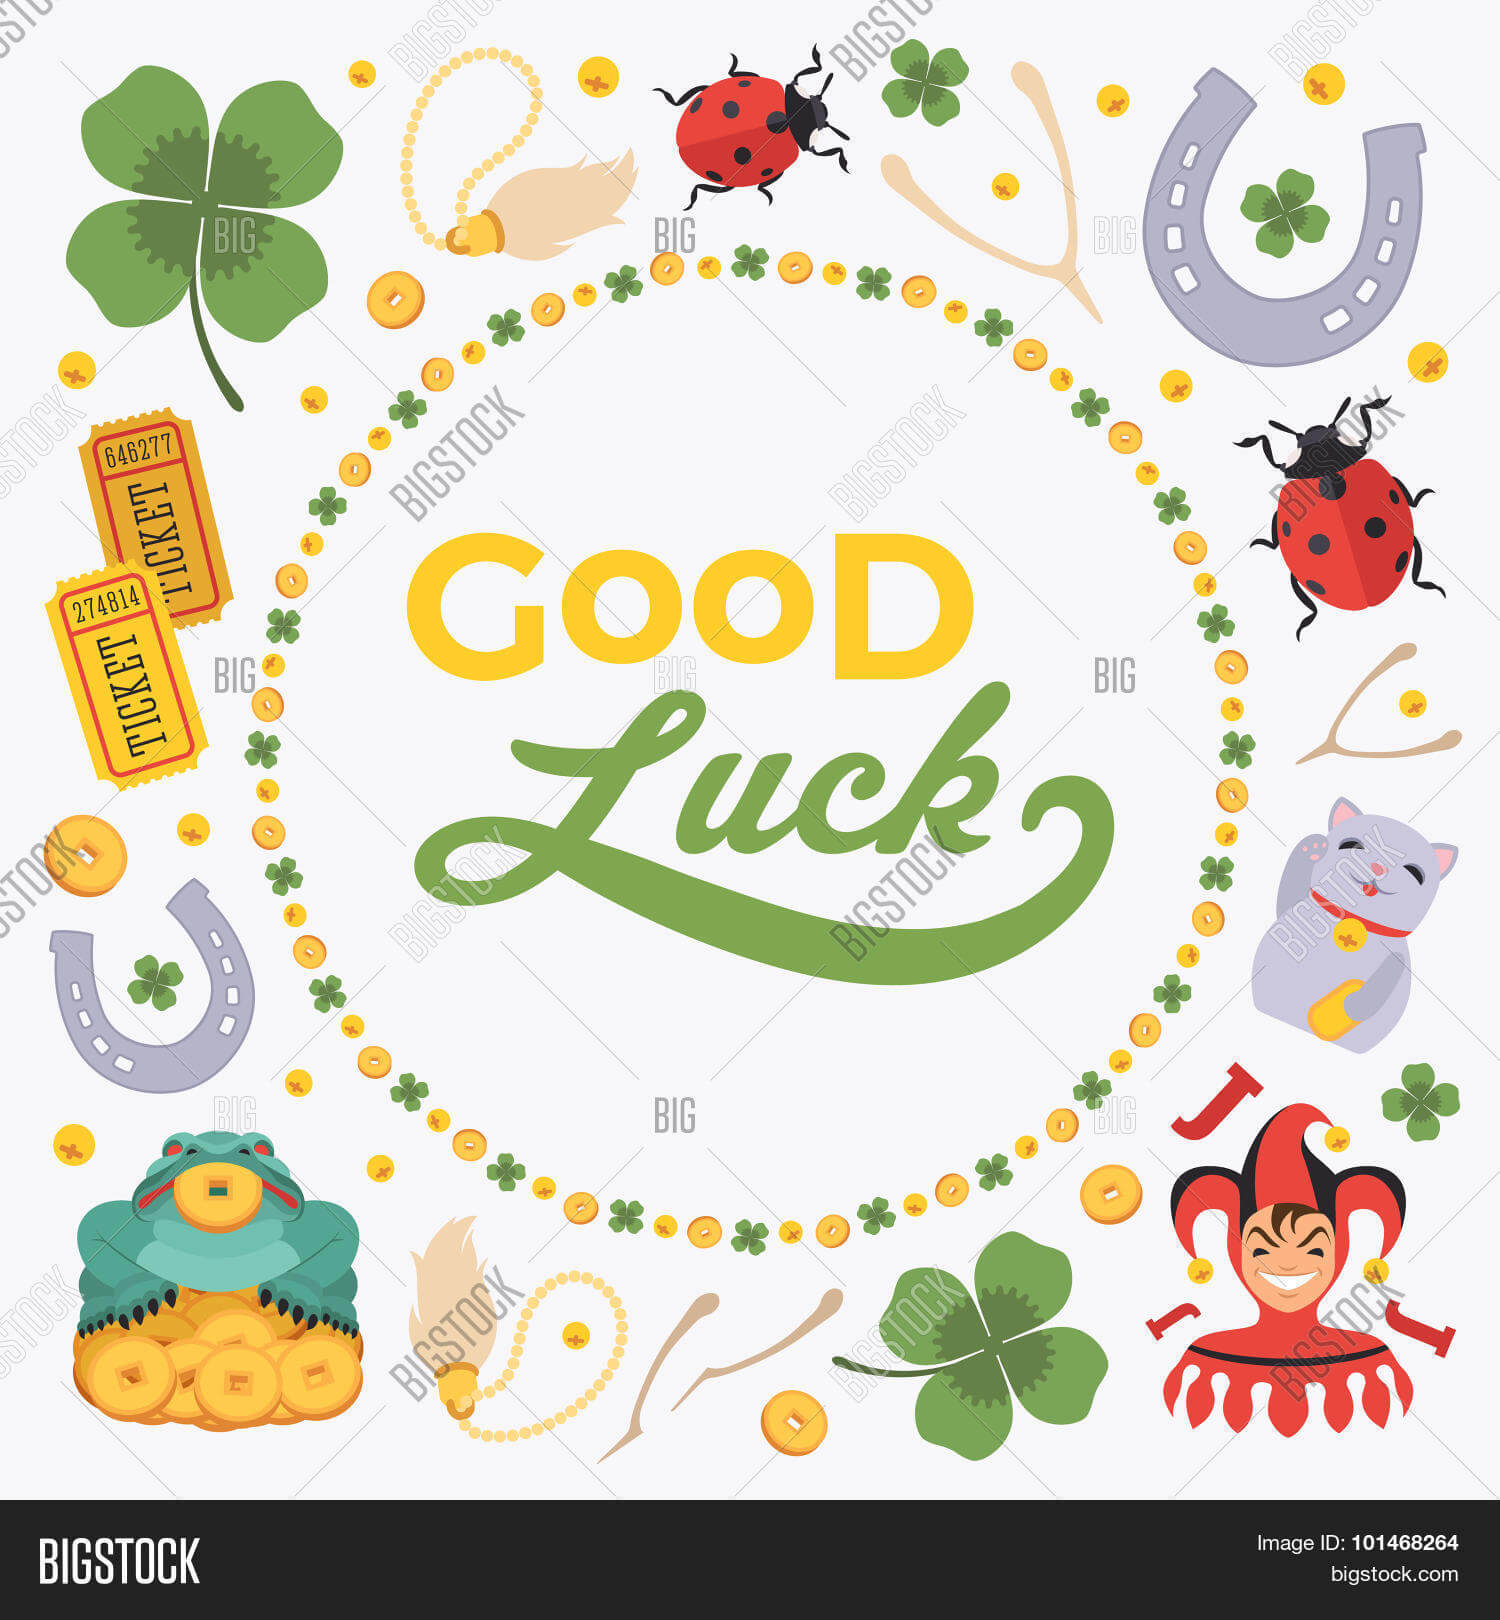 Vector Decorating Vector & Photo (Free Trial) | Bigstock With Good Luck Card Template